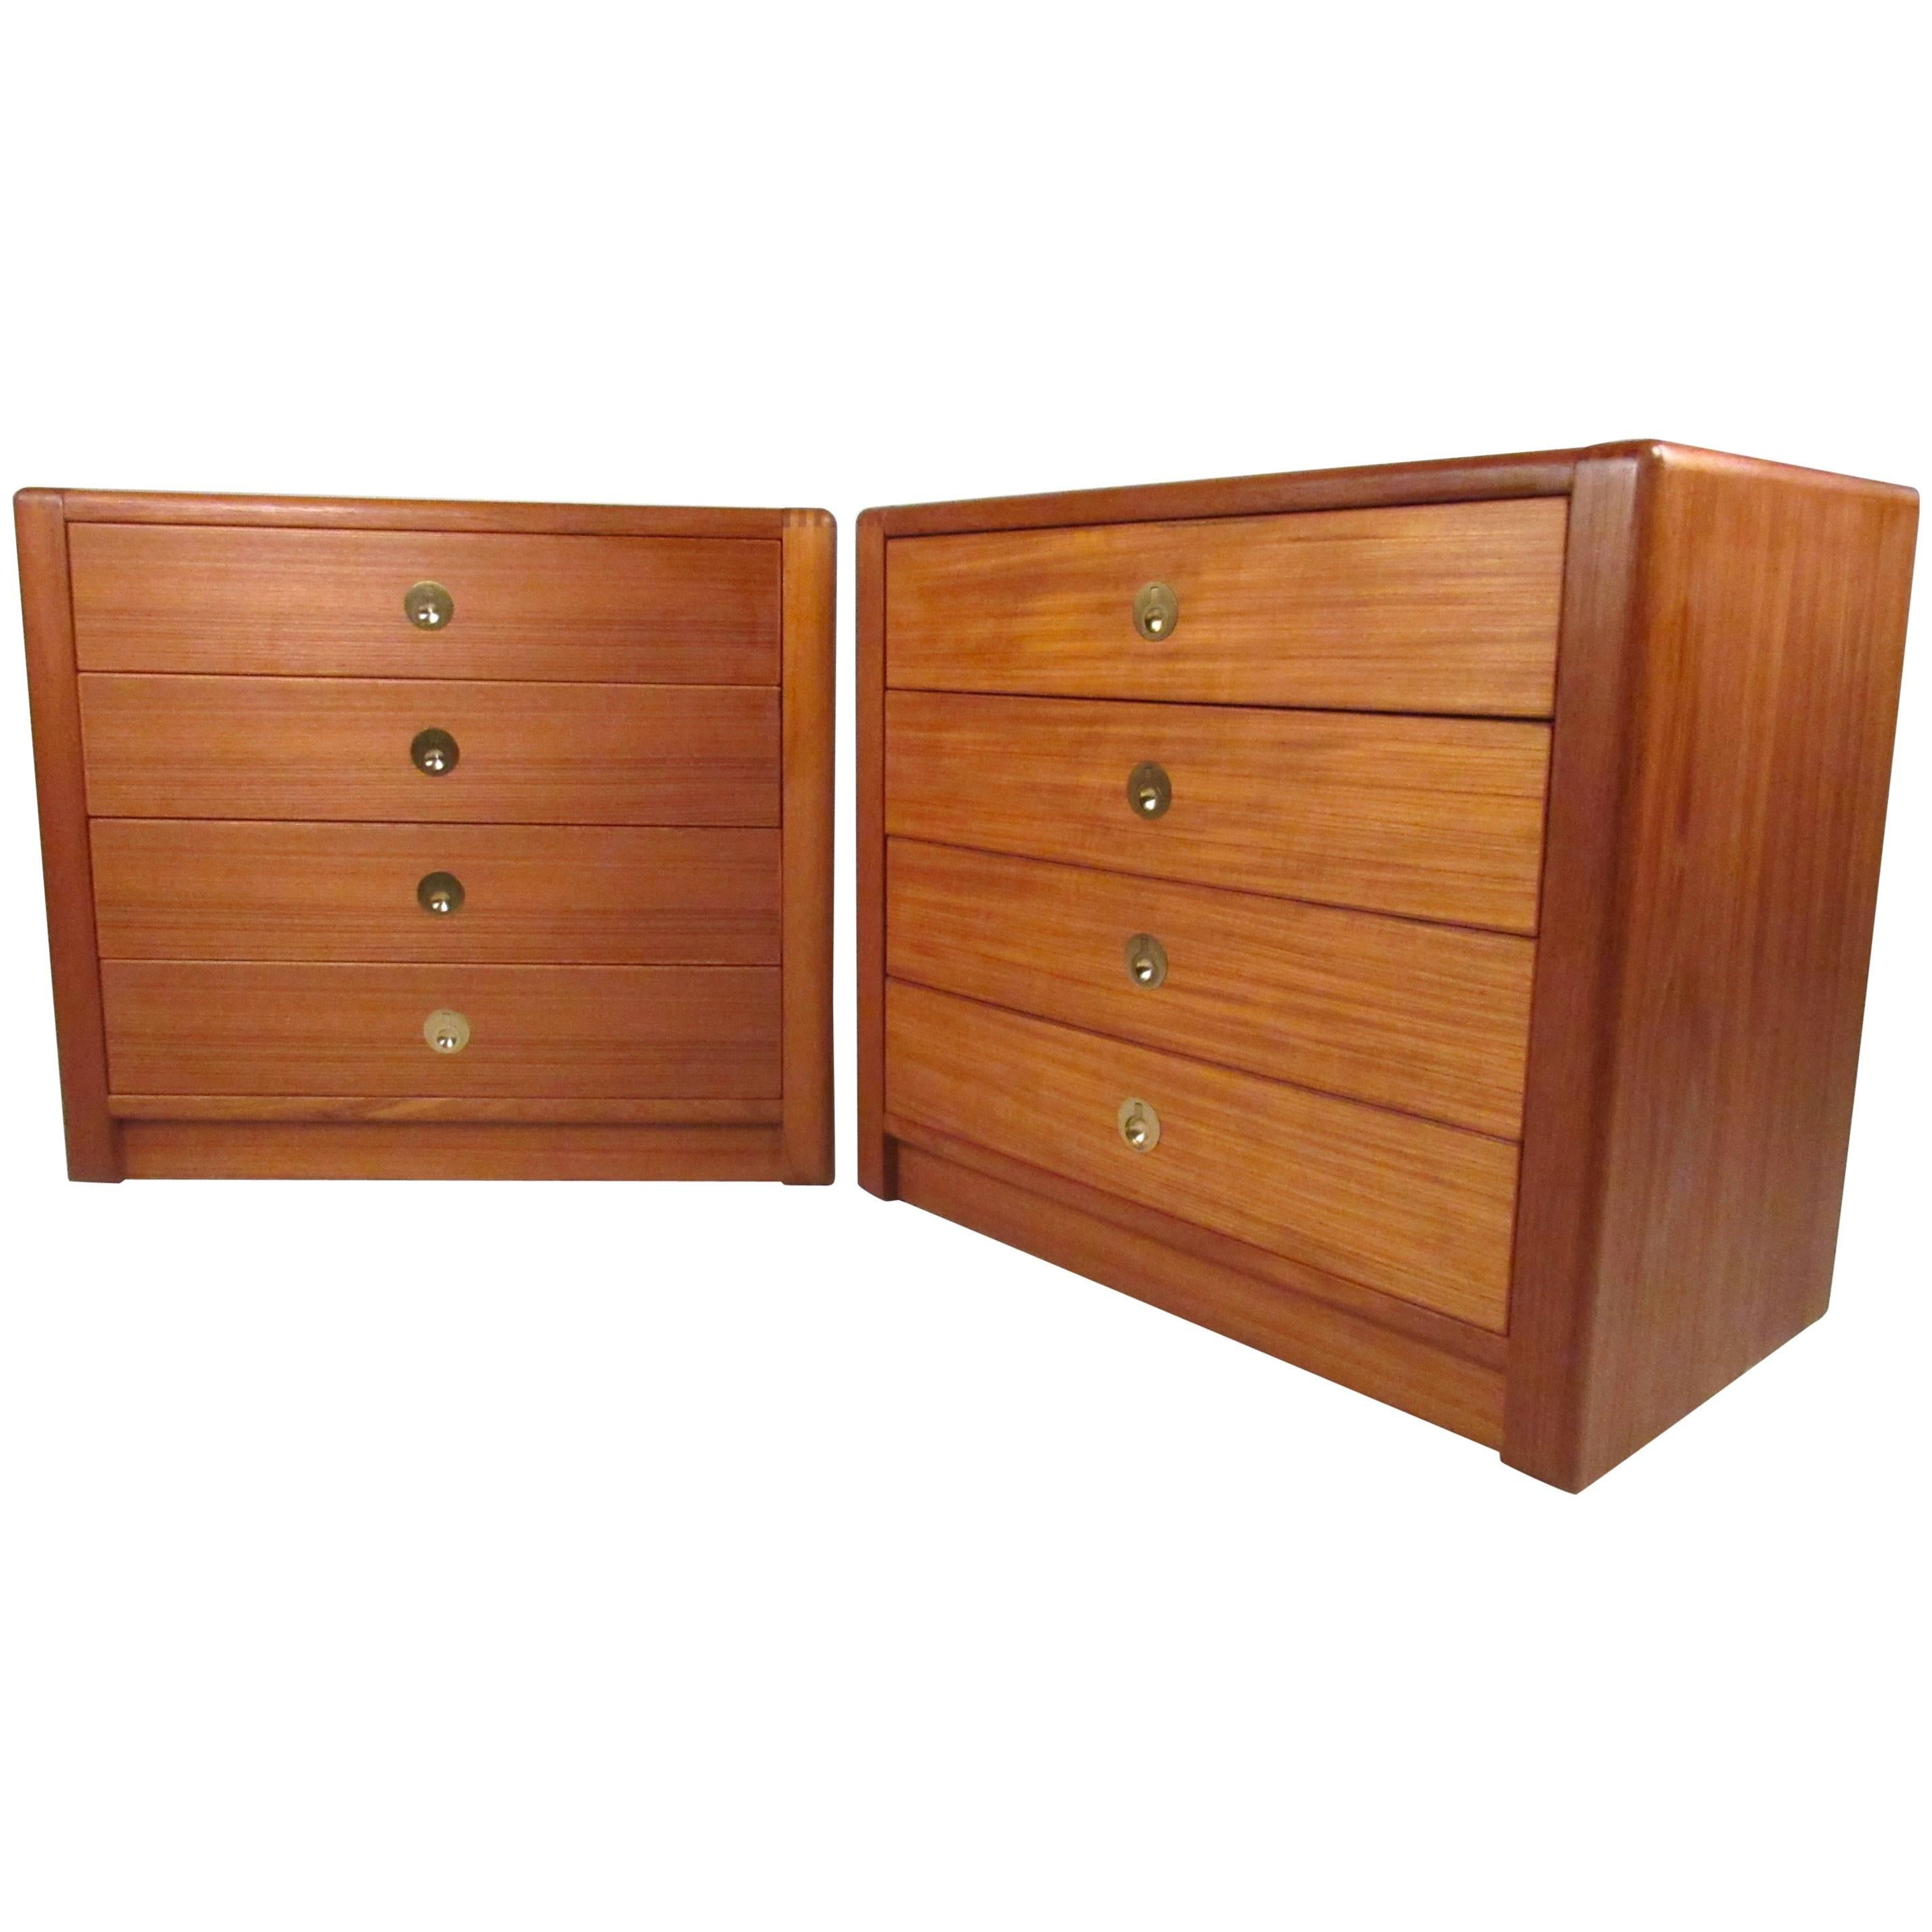 Pair of "Captain Line" Mid-Century Dressers by D-Scan